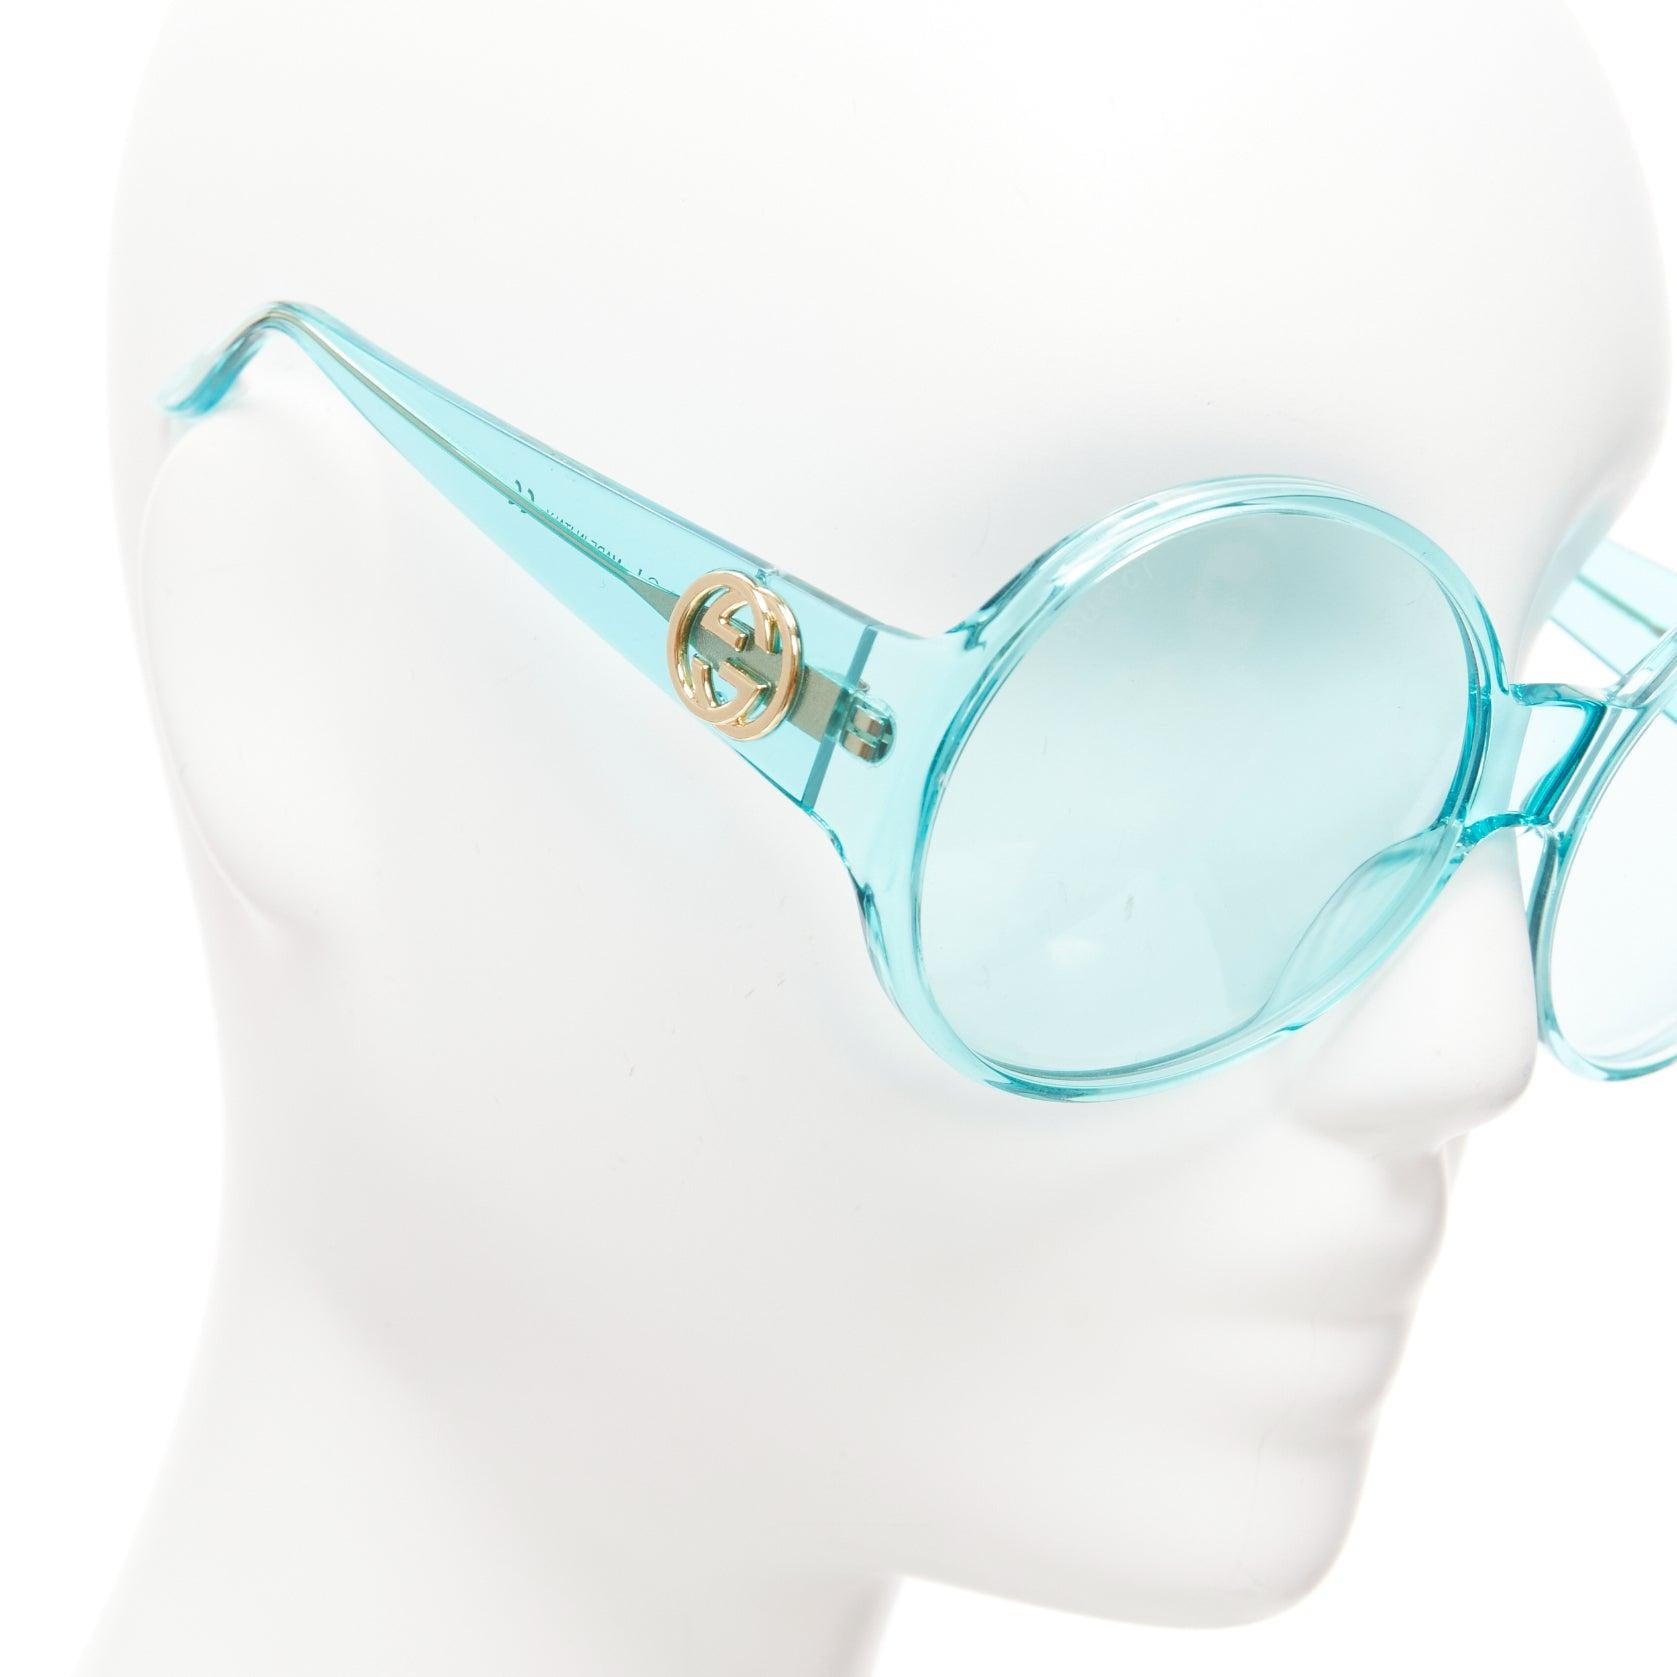 GUCCI Alessandro Michele GG0954S blue hue round frame oversized sunnies For Sale 2